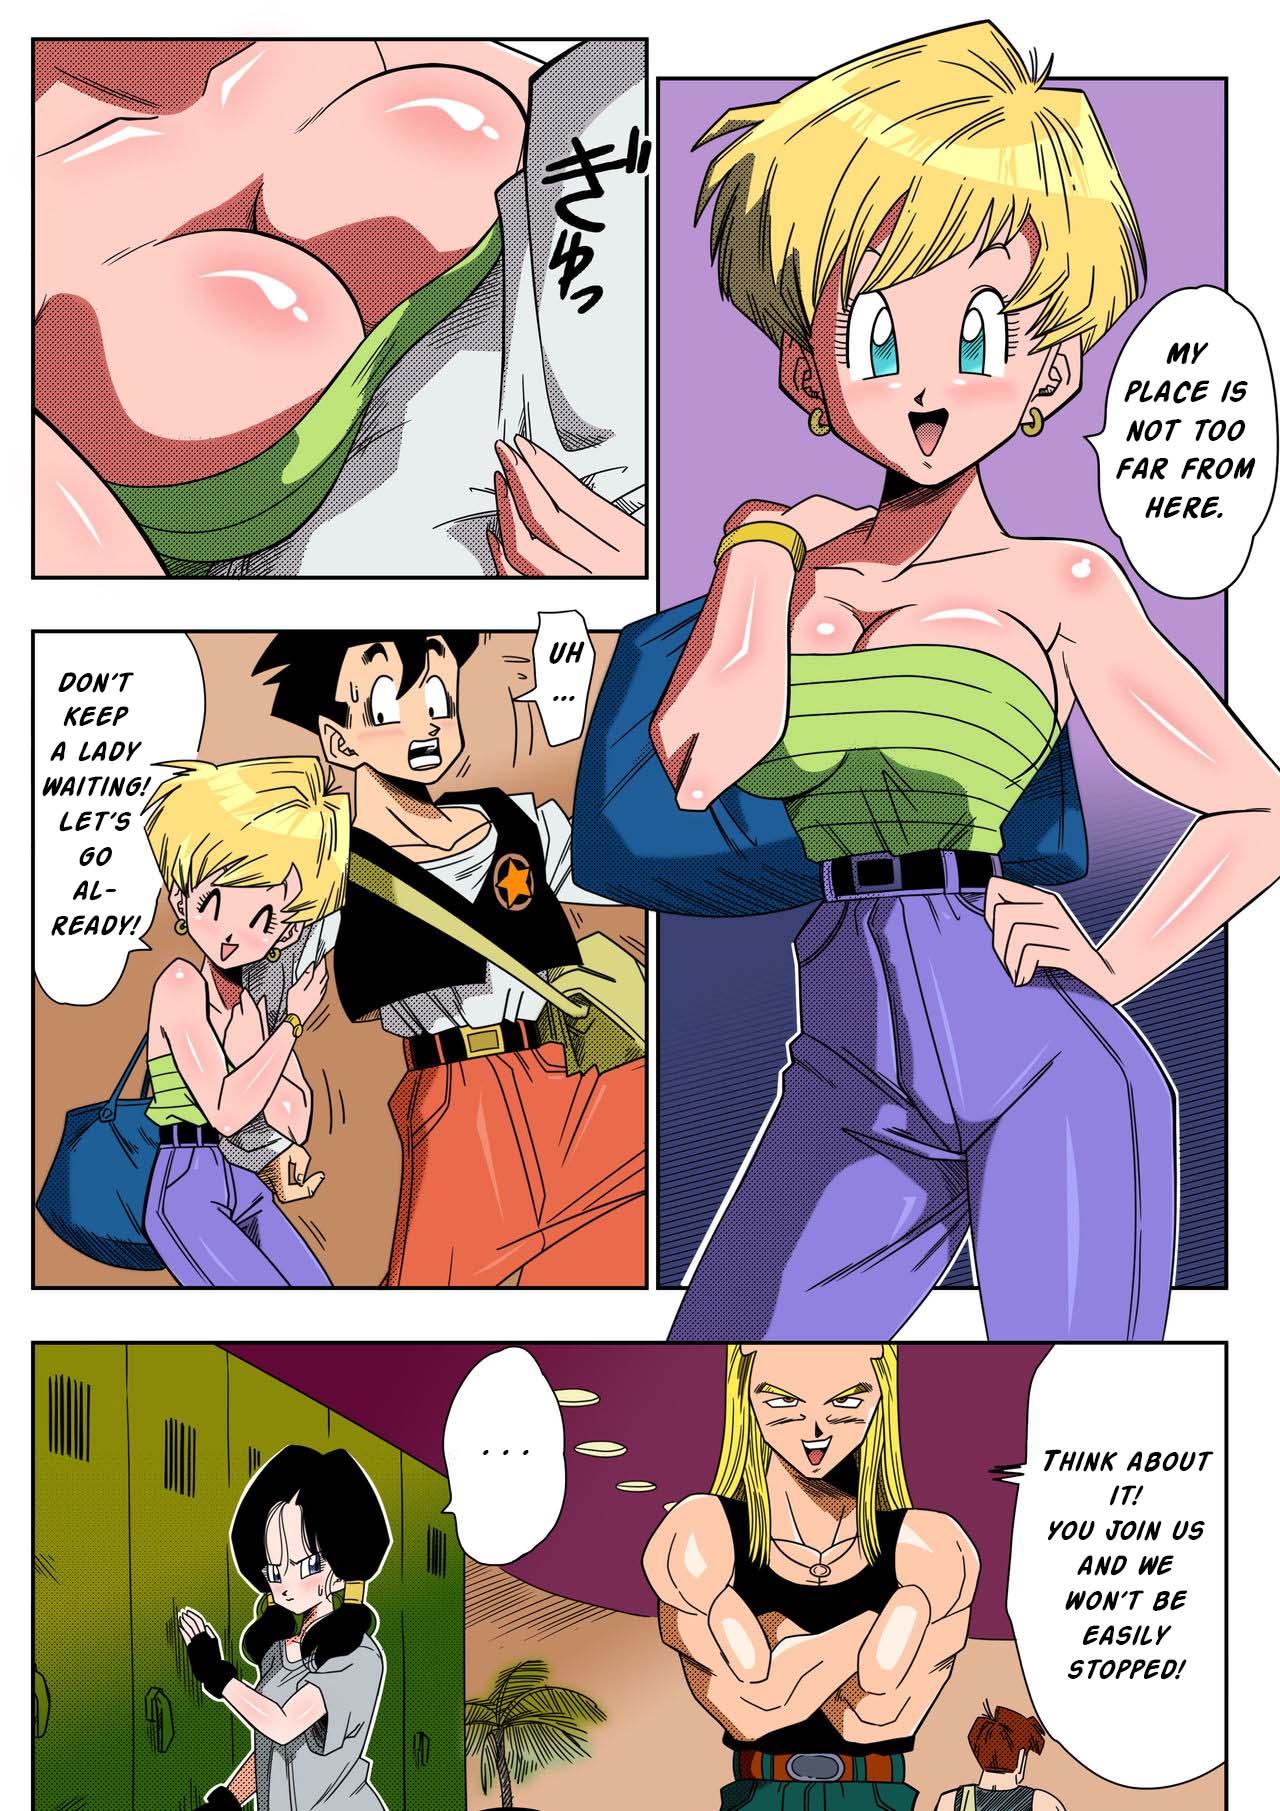 Dominant LOVE TRIANGLE Z Part 1-4 - Dragon ball z Behind - Page 5